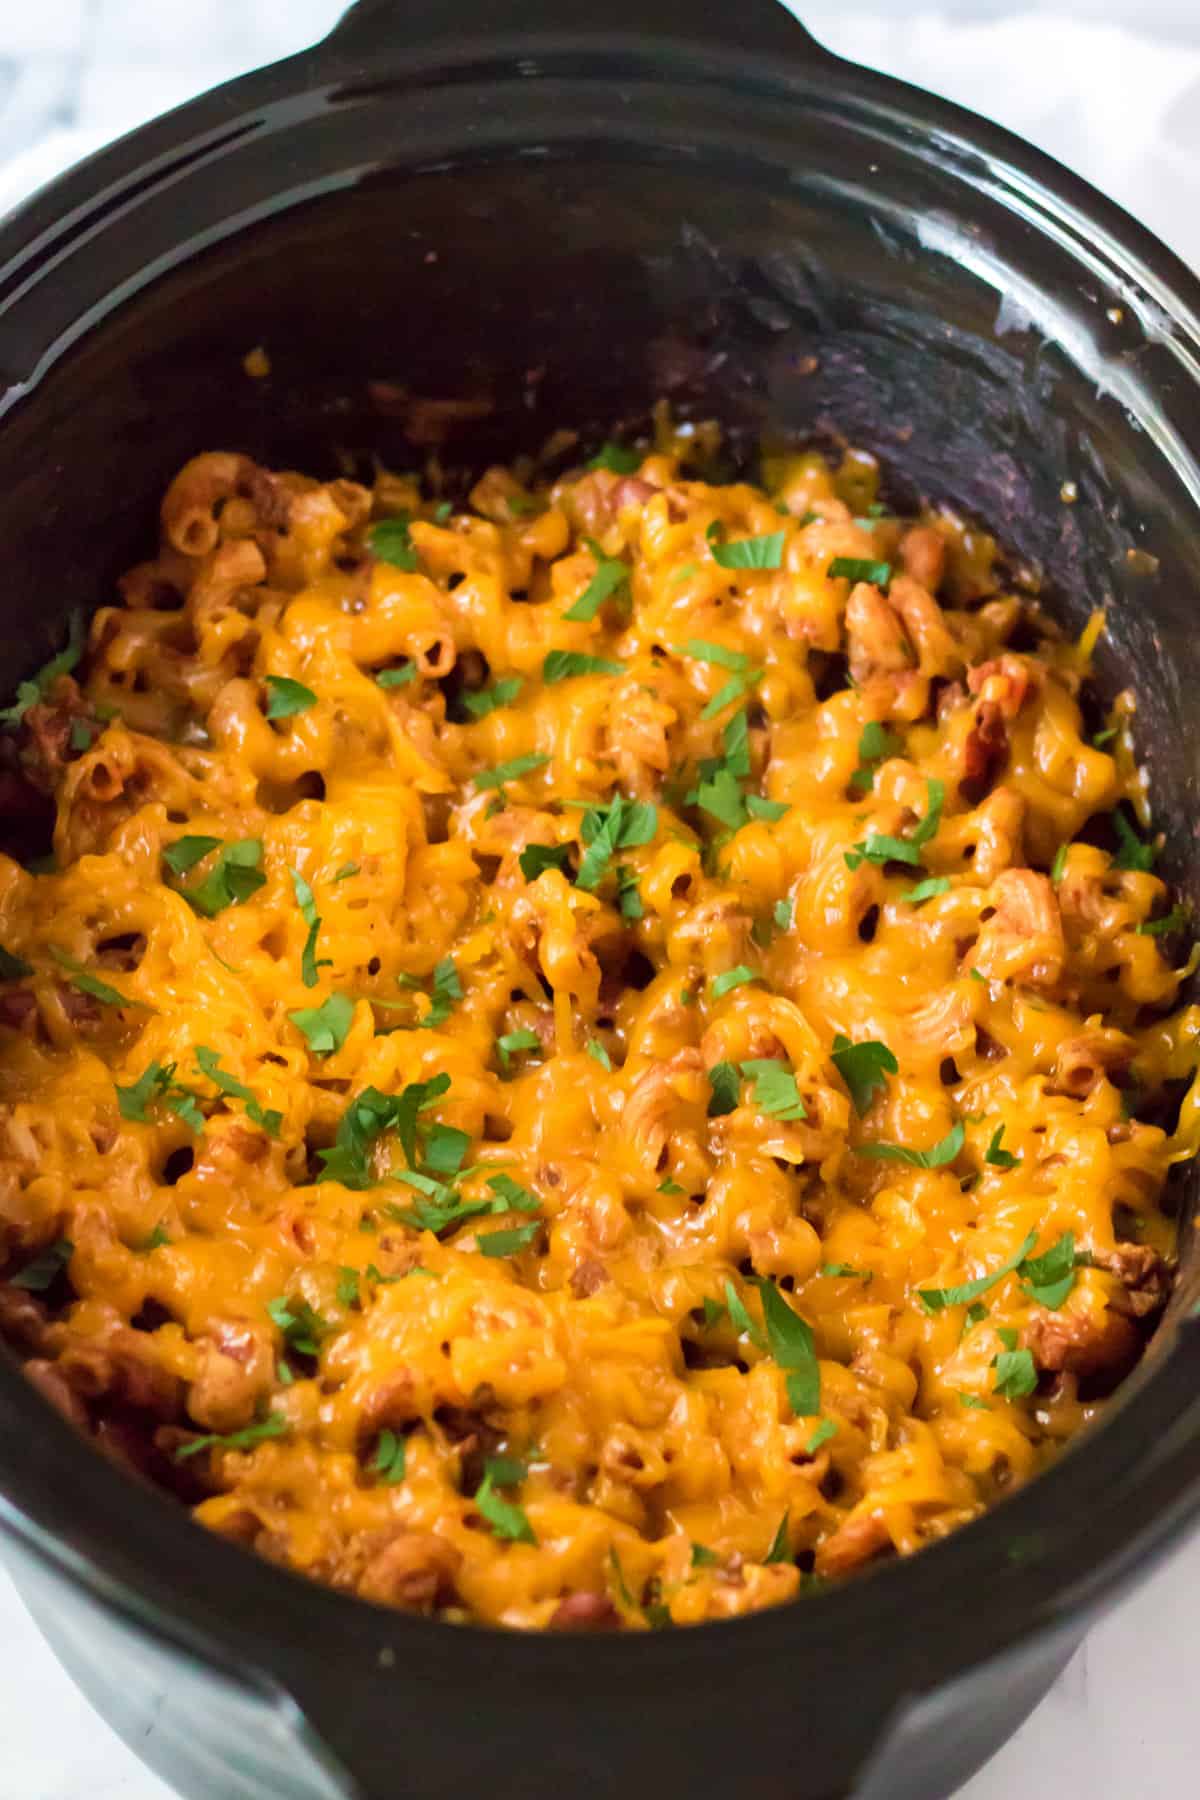 Slow Cooker chili mac with cheese, beans, and garnished with chopped parsley.